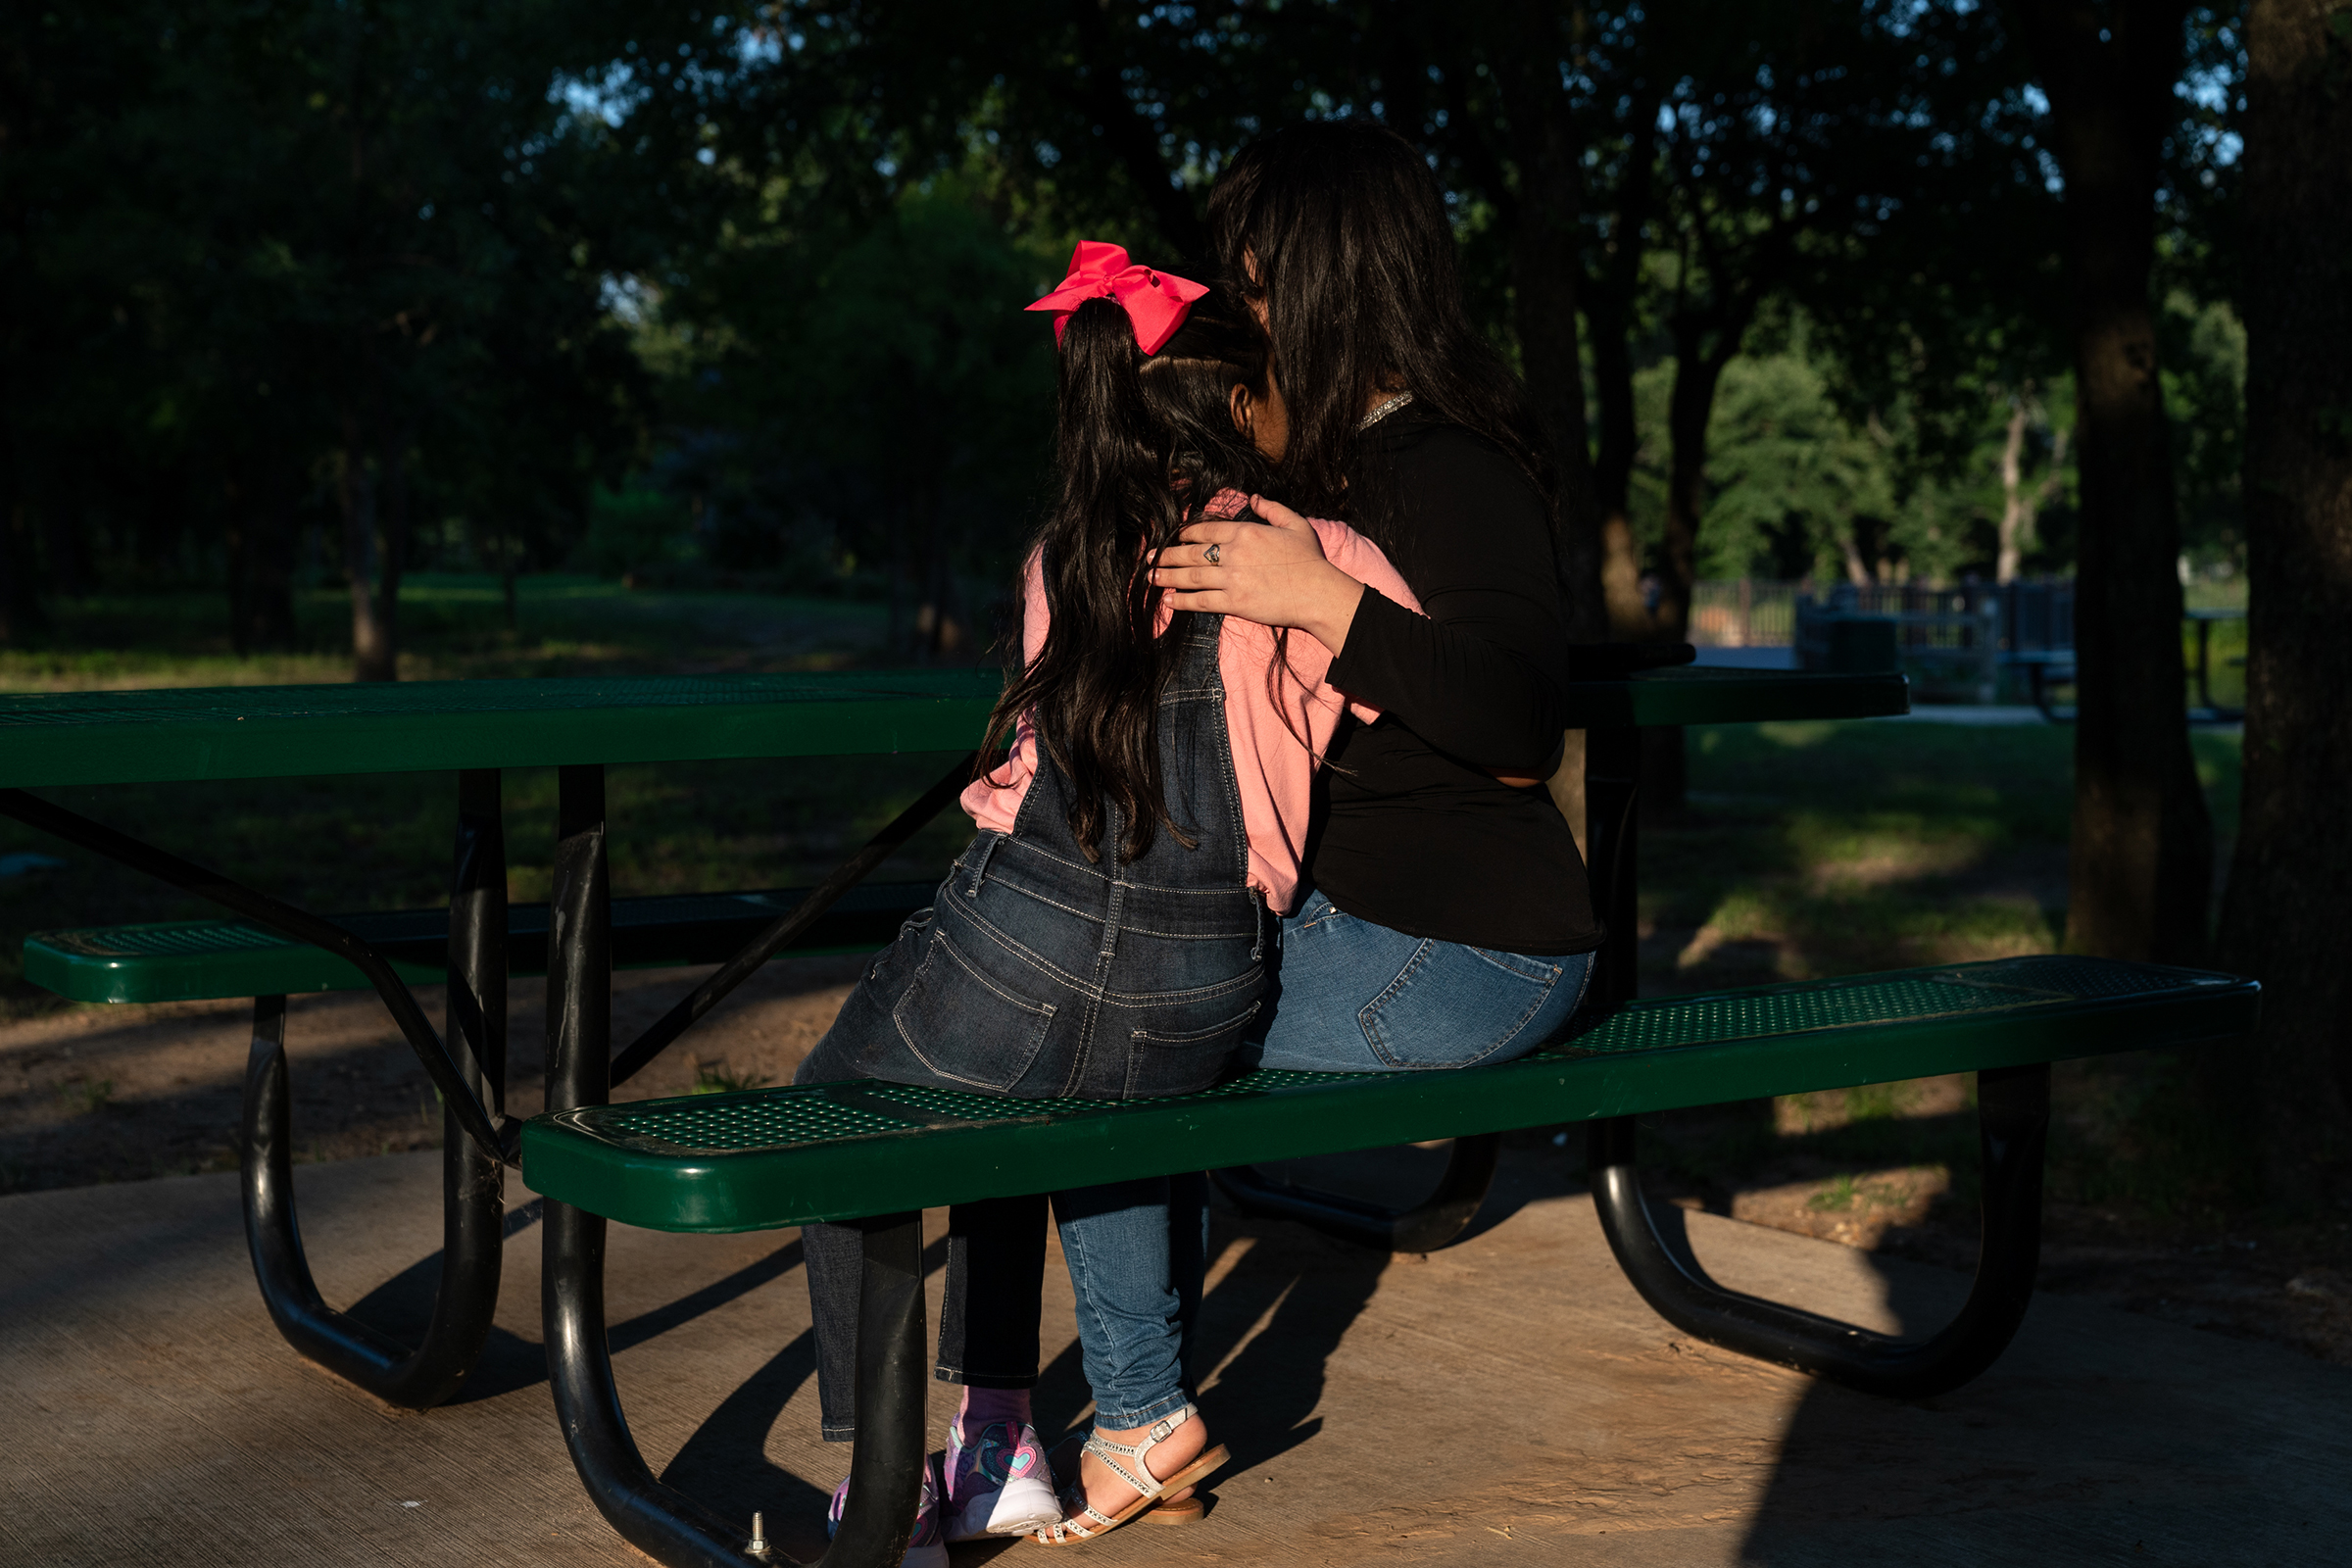 Estefani and her eight-year-old daughter, Ashly, embrace in a park near the home of relatives in June. (Ilana Panich-Linsman for TIME)